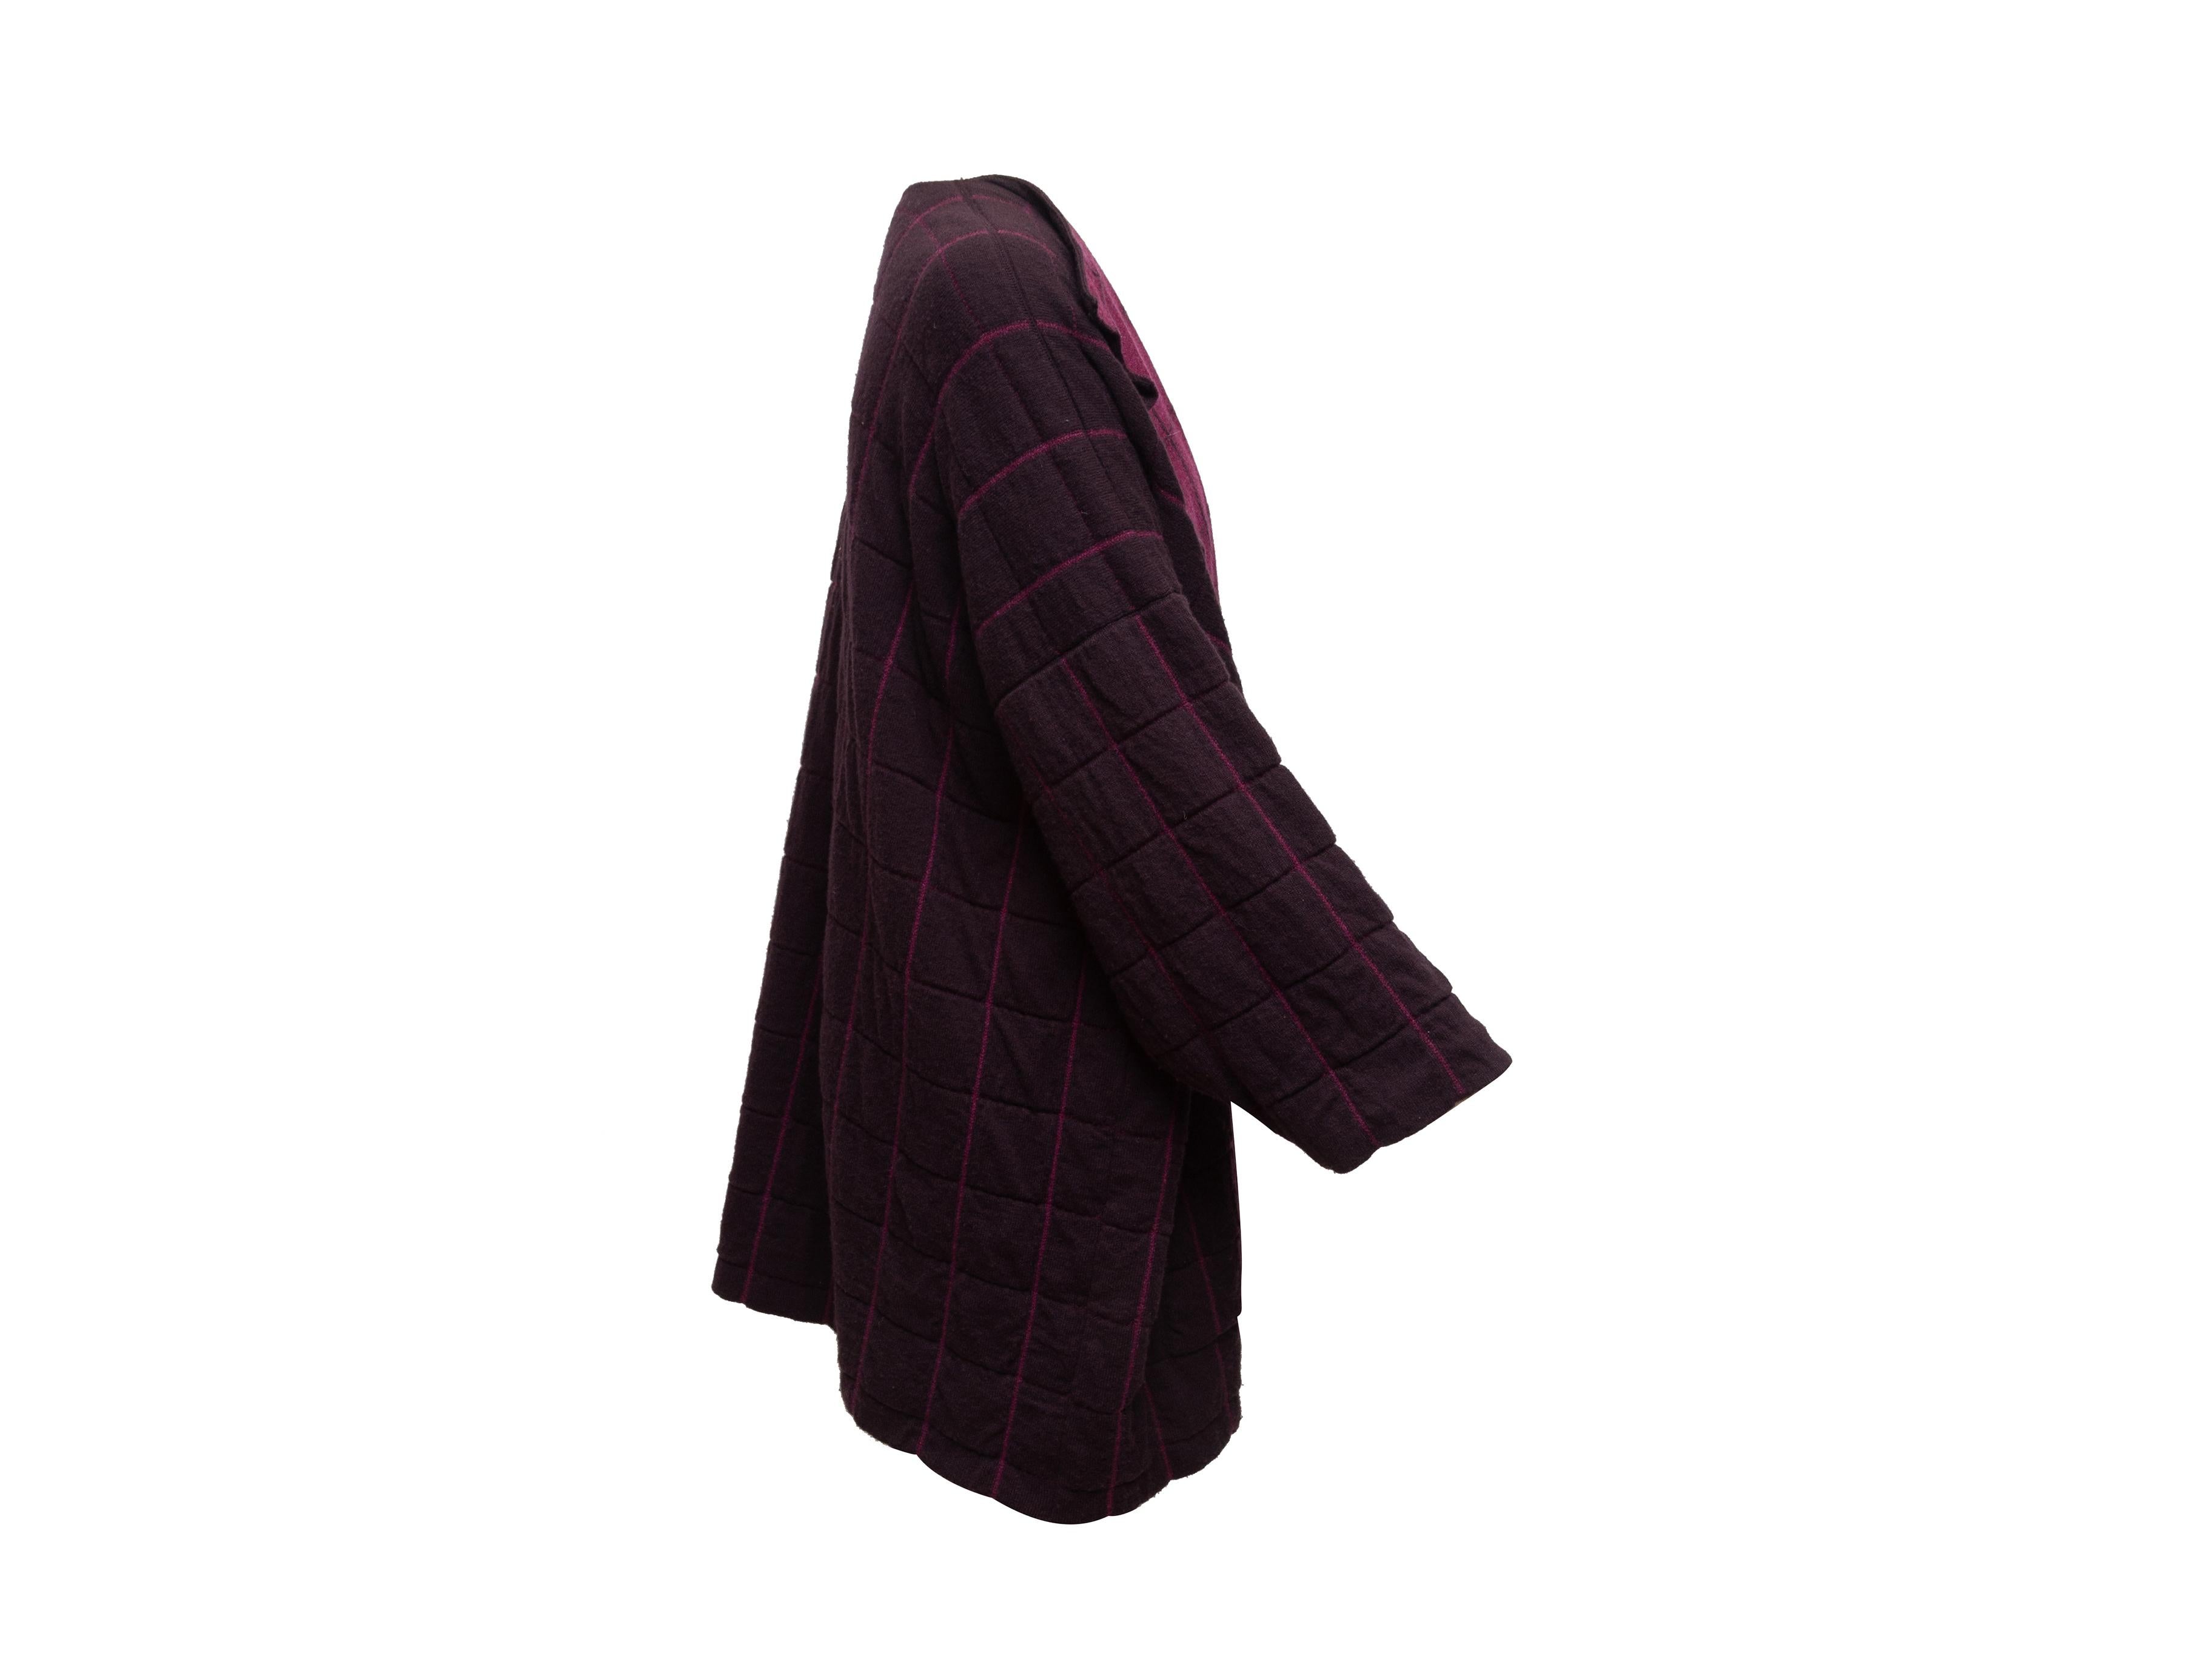 Product details: Plum and fuchsia cashmere cardigan by Eskandar. Grid pattern throughout. Open front. 36